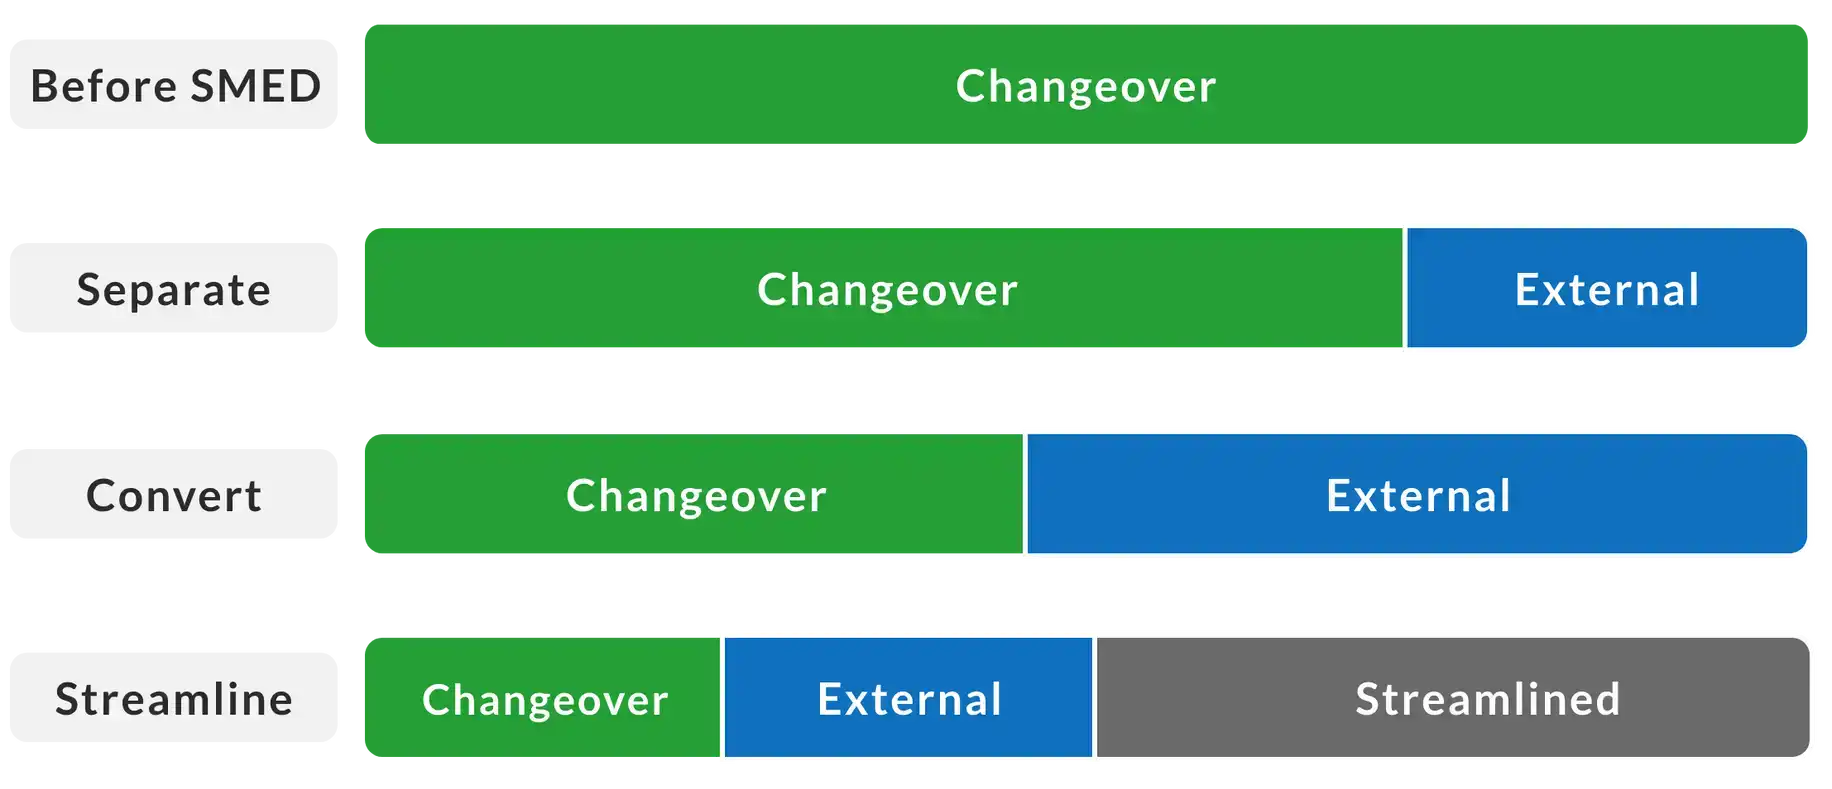 Chart showing that before implementing SMED your changeovers are long, but can be reduced by separating, converting, and streamlining.